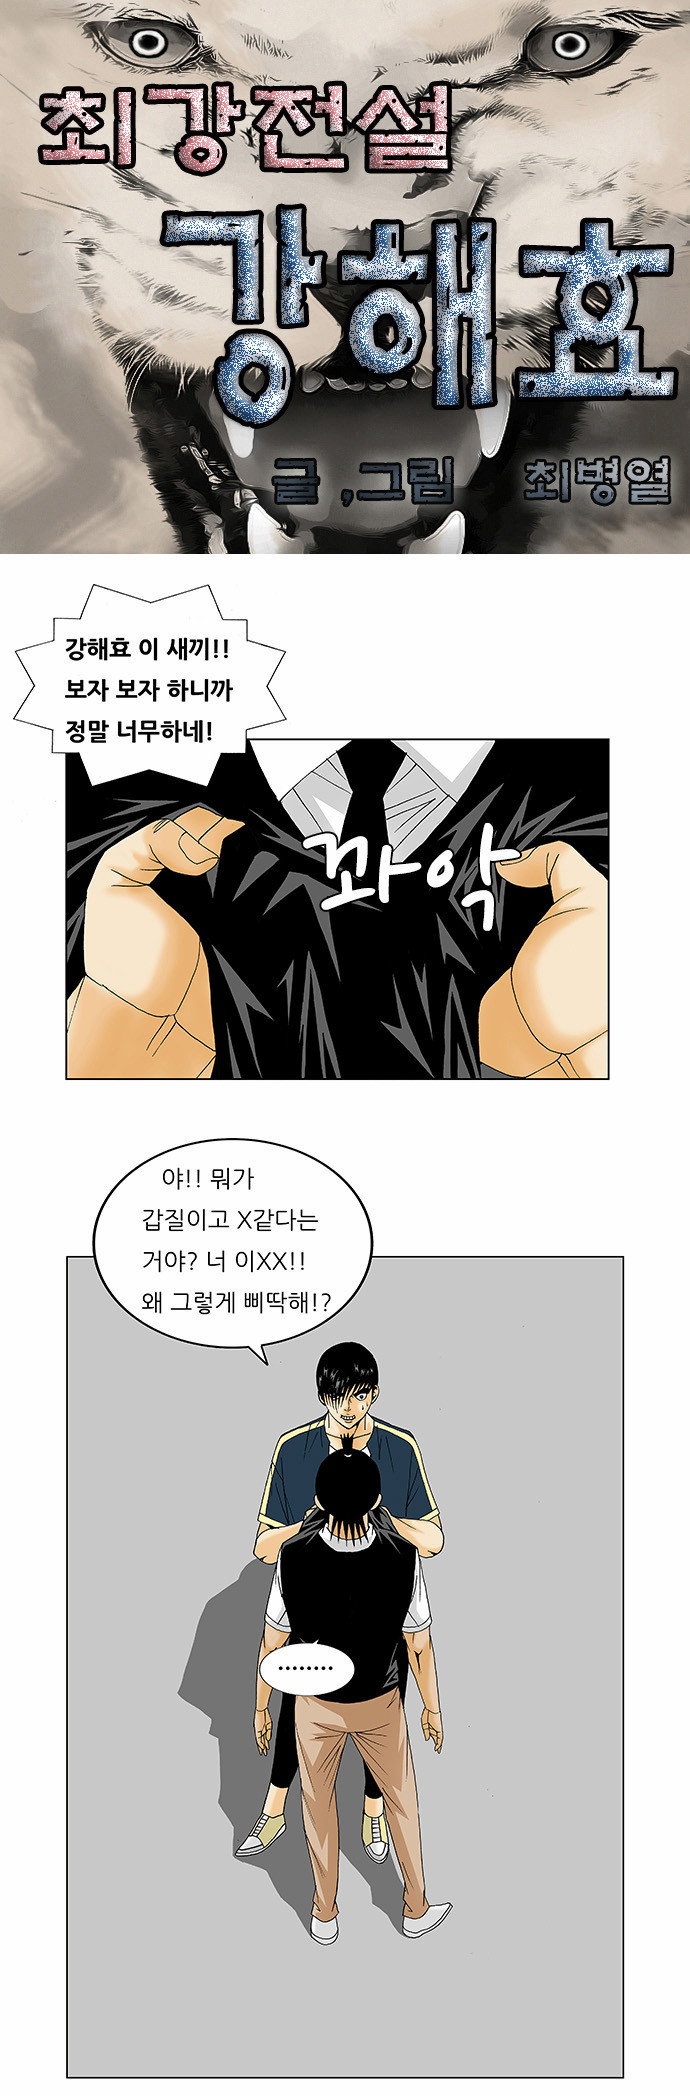 Ultimate Legend - Kang Hae Hyo - Chapter 133 - Page 1